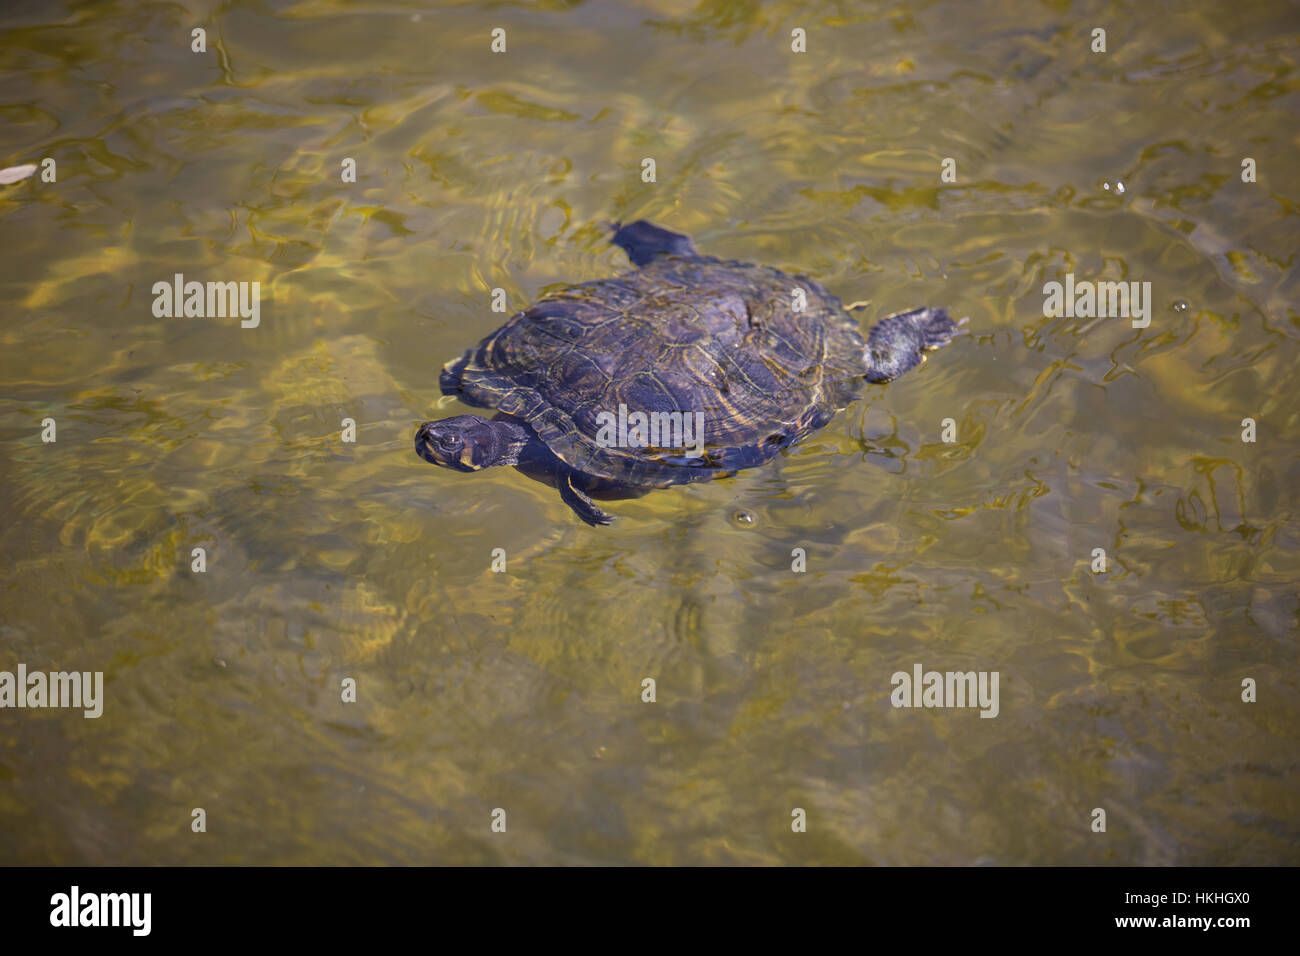 turtle on water surface. aquatic, natural, animal, creature. Stock Photo